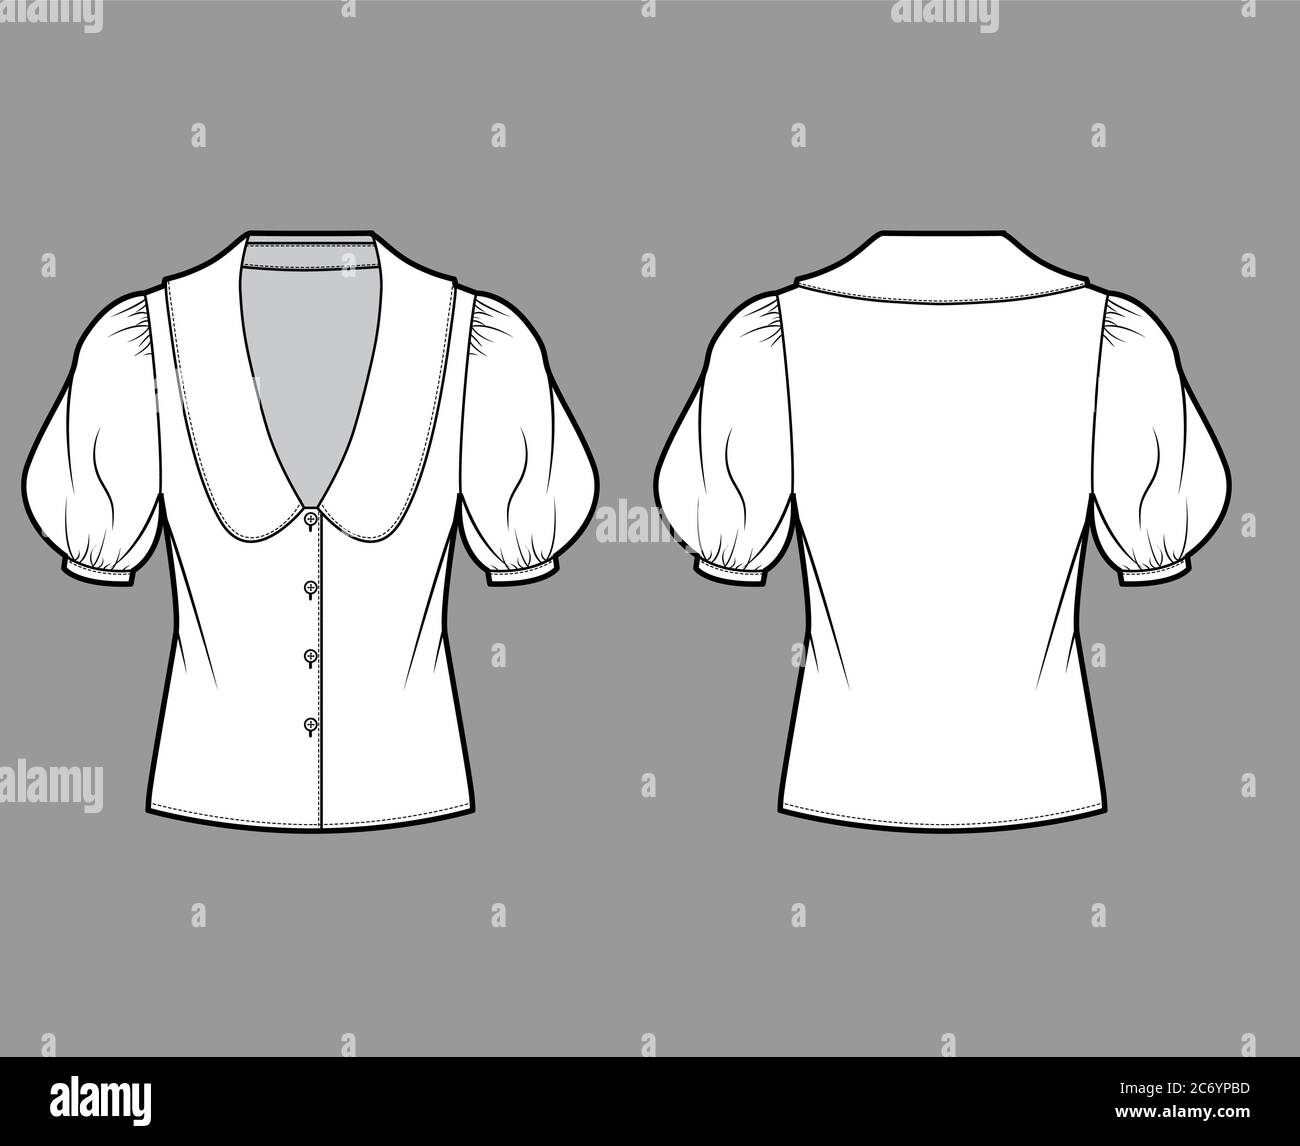 Blouse technical fashion illustration with collar framing V neck, oversized medium puffed sleeves and body. Flat apparel template front, back, white color. Women, men unisex garment CAD mockup Stock Vector